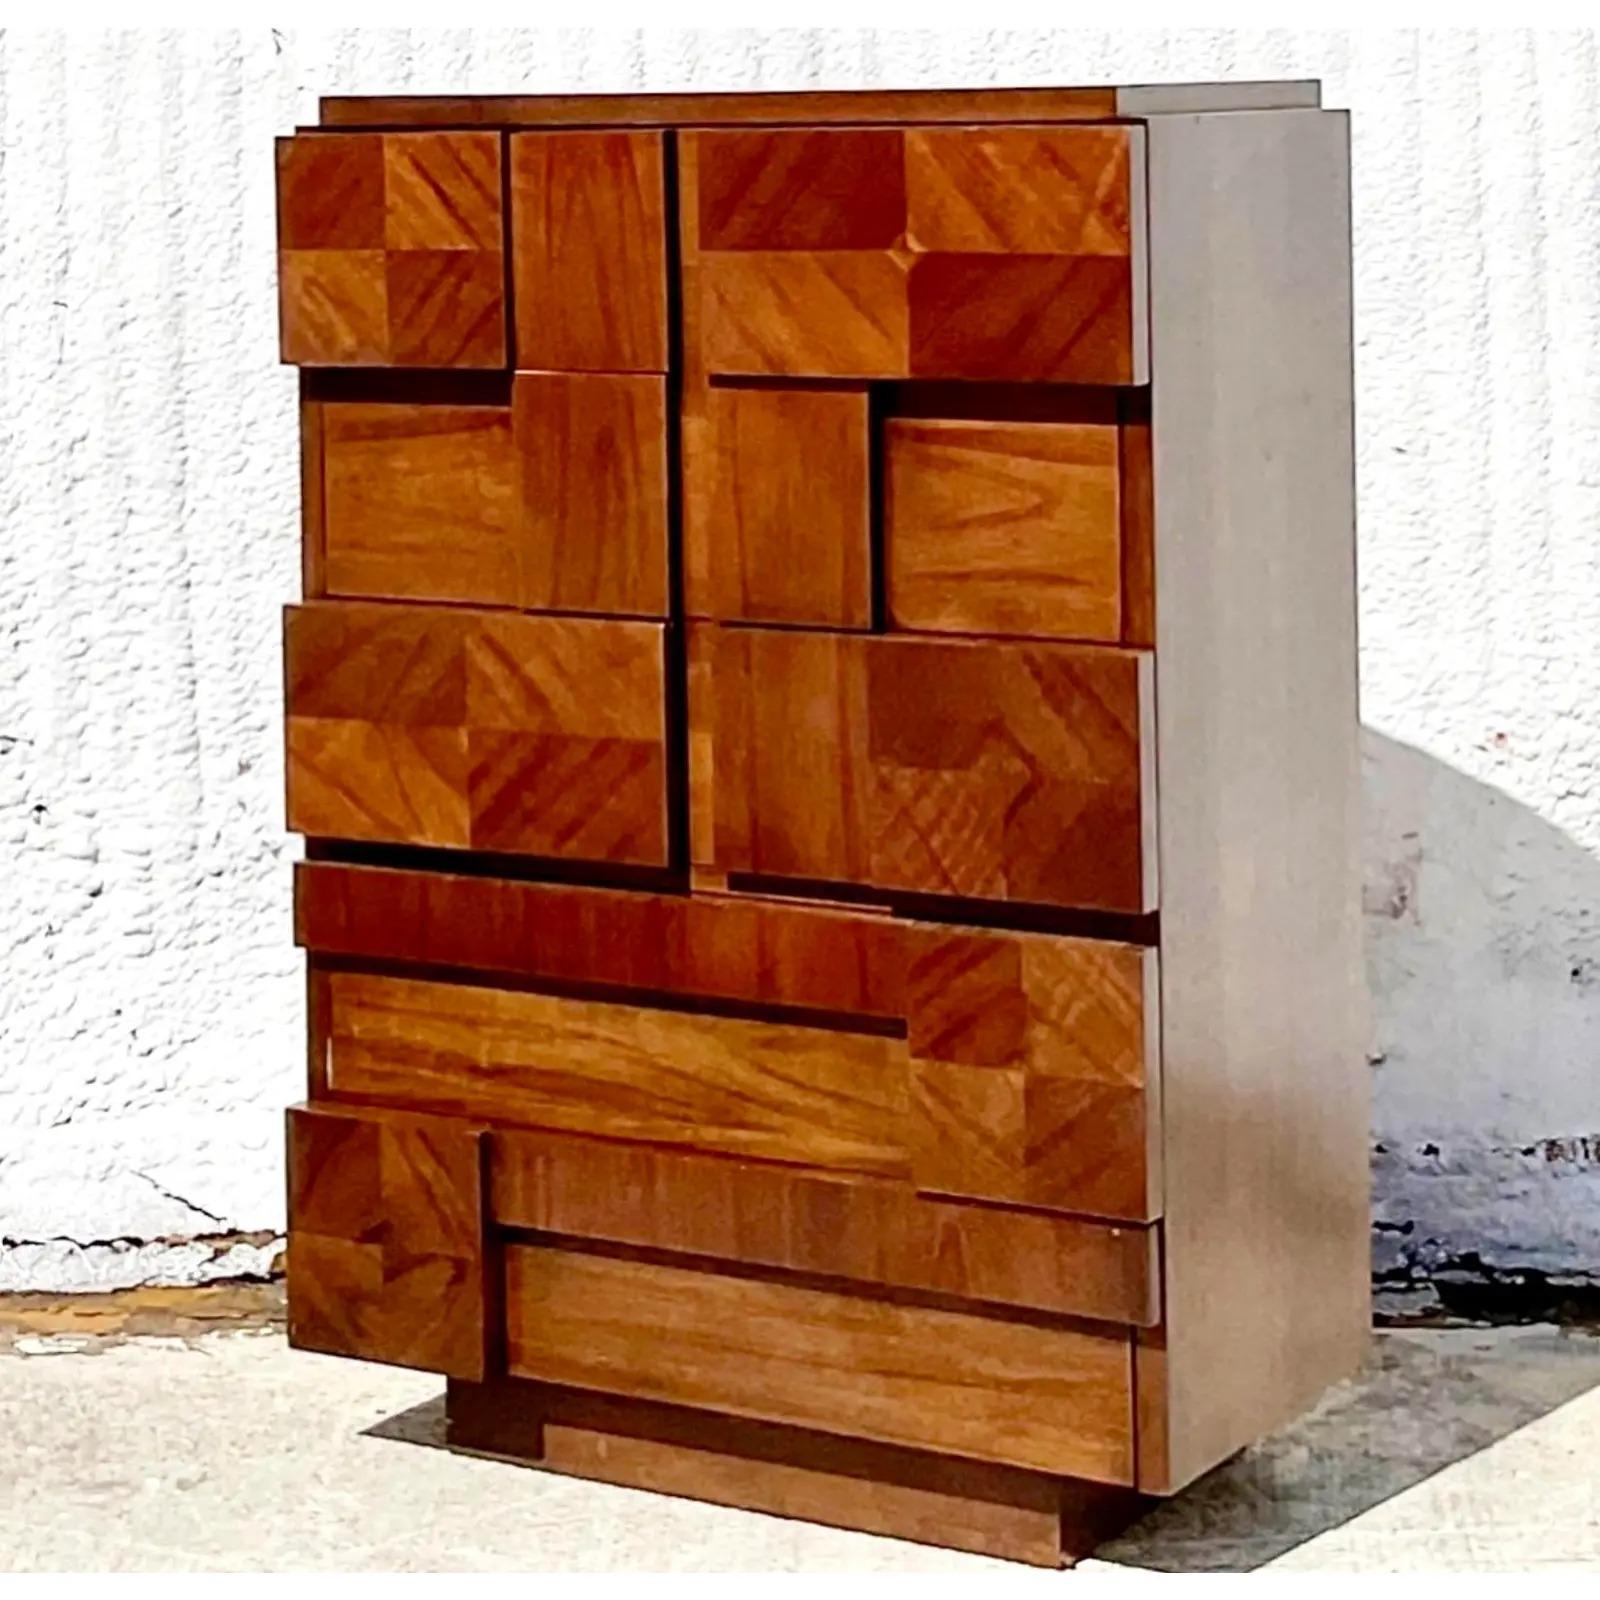 Vintage Midcentury gentlemen's chest. The super coveted Lane Mosaics collection. Lots of great storage above with two roomy drawers below. A real workhorse. Great for city living! Acquired from a Palm beach estate.